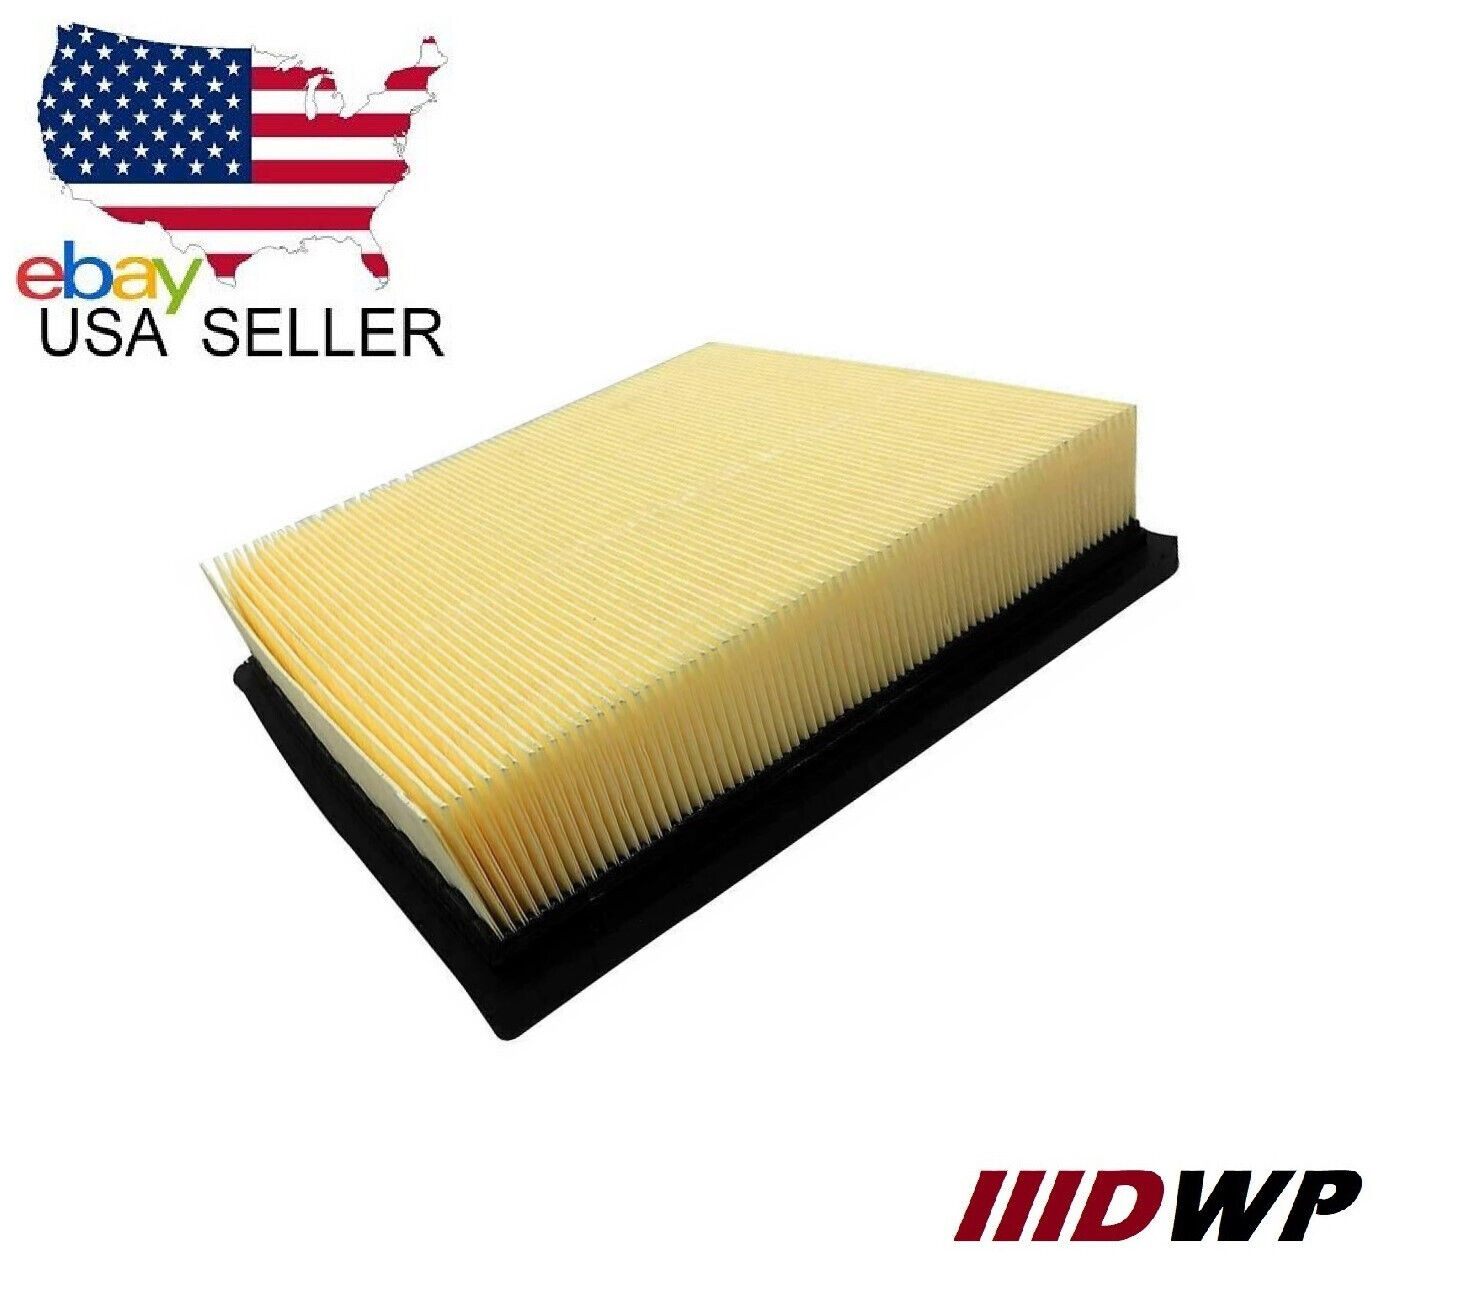 ENGINE AIR FILTER FOR DODGE 2011 - 2022 DURANGO & JEEP 2011 -2021 GRAND CHEROKEE